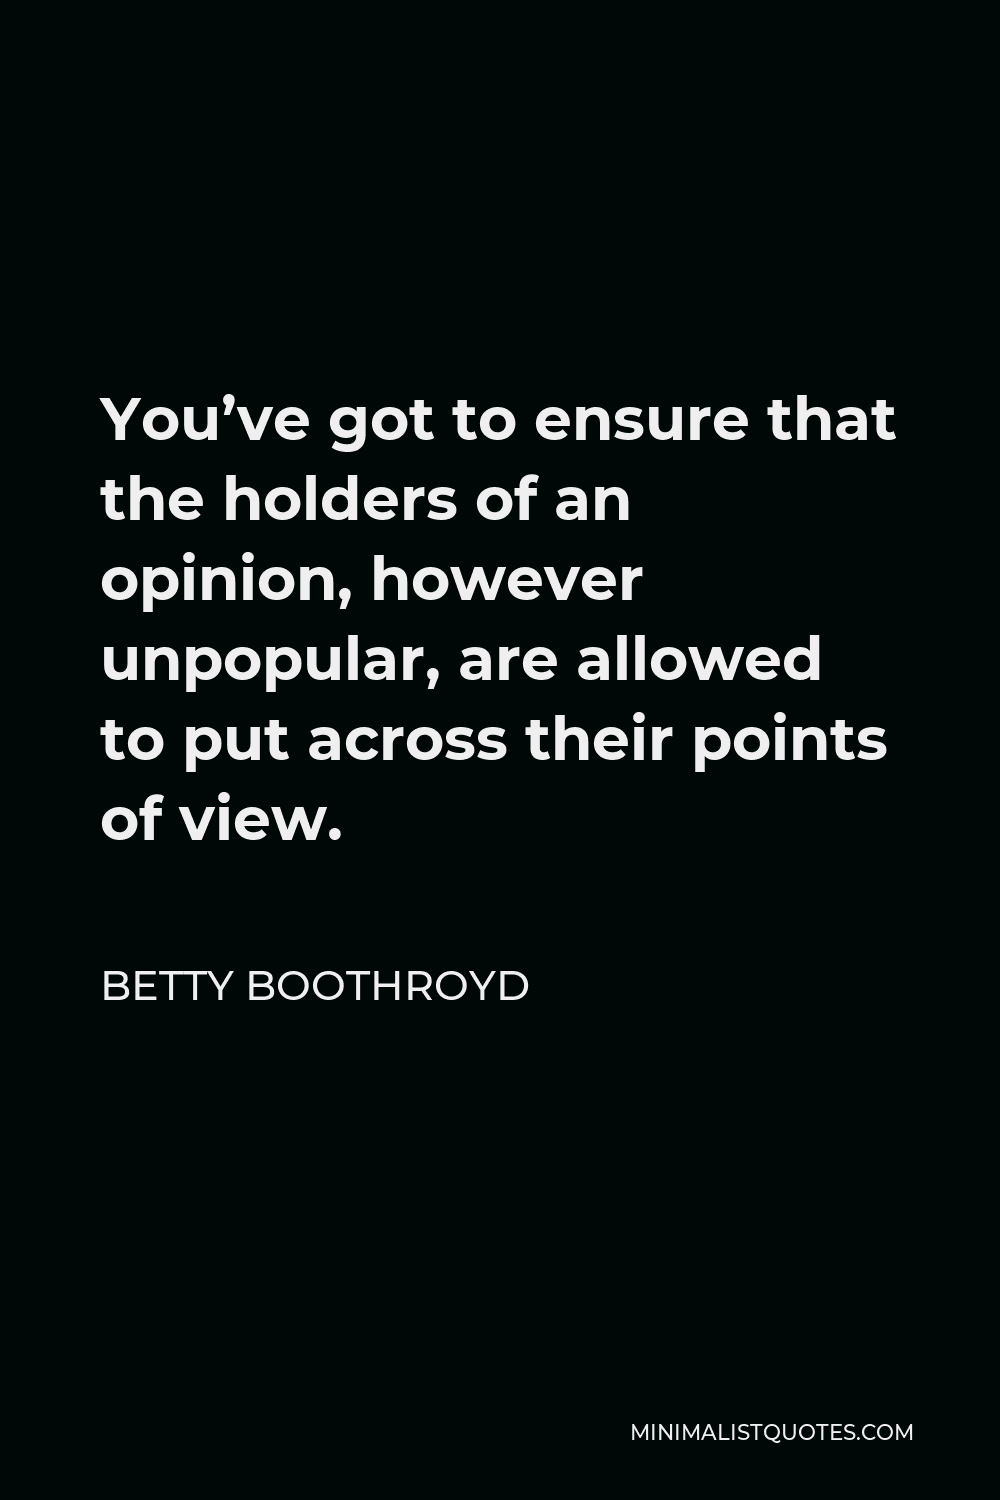 Betty Boothroyd Quote - You’ve got to ensure that the holders of an opinion, however unpopular, are allowed to put across their points of view.